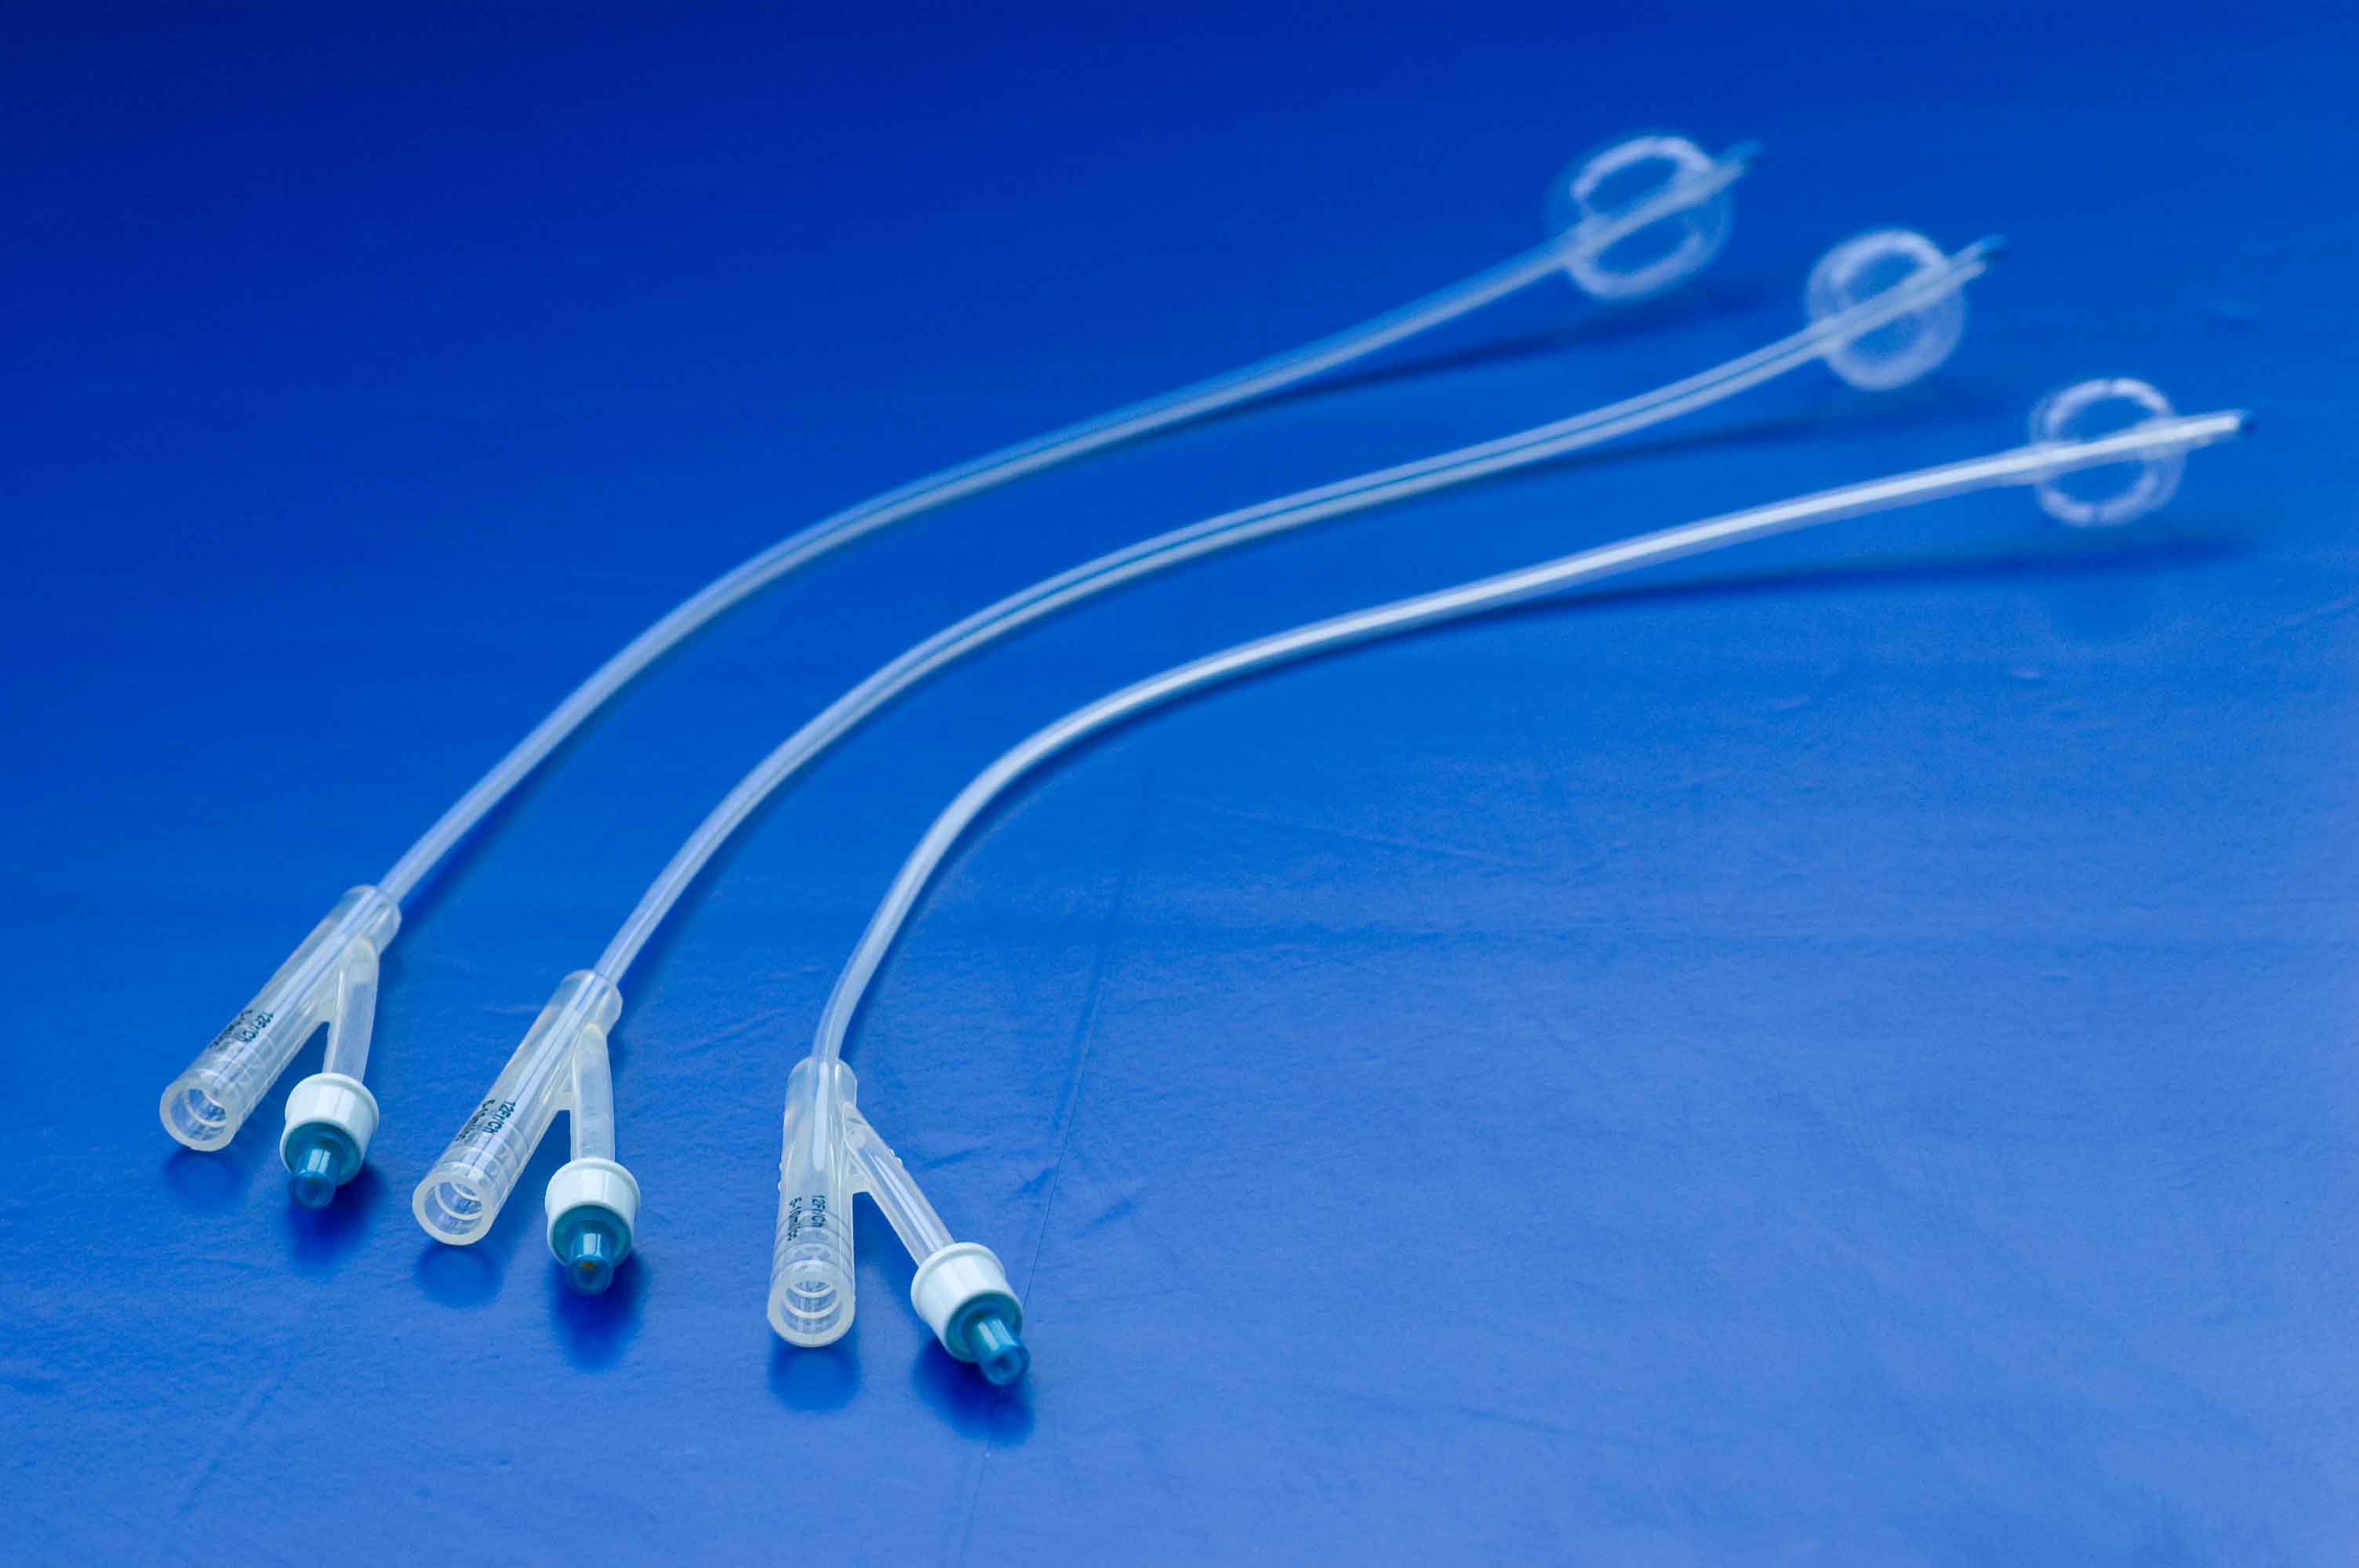 What is the benefit of having a silicone Foley catheter versus a latex Foley catheter? 